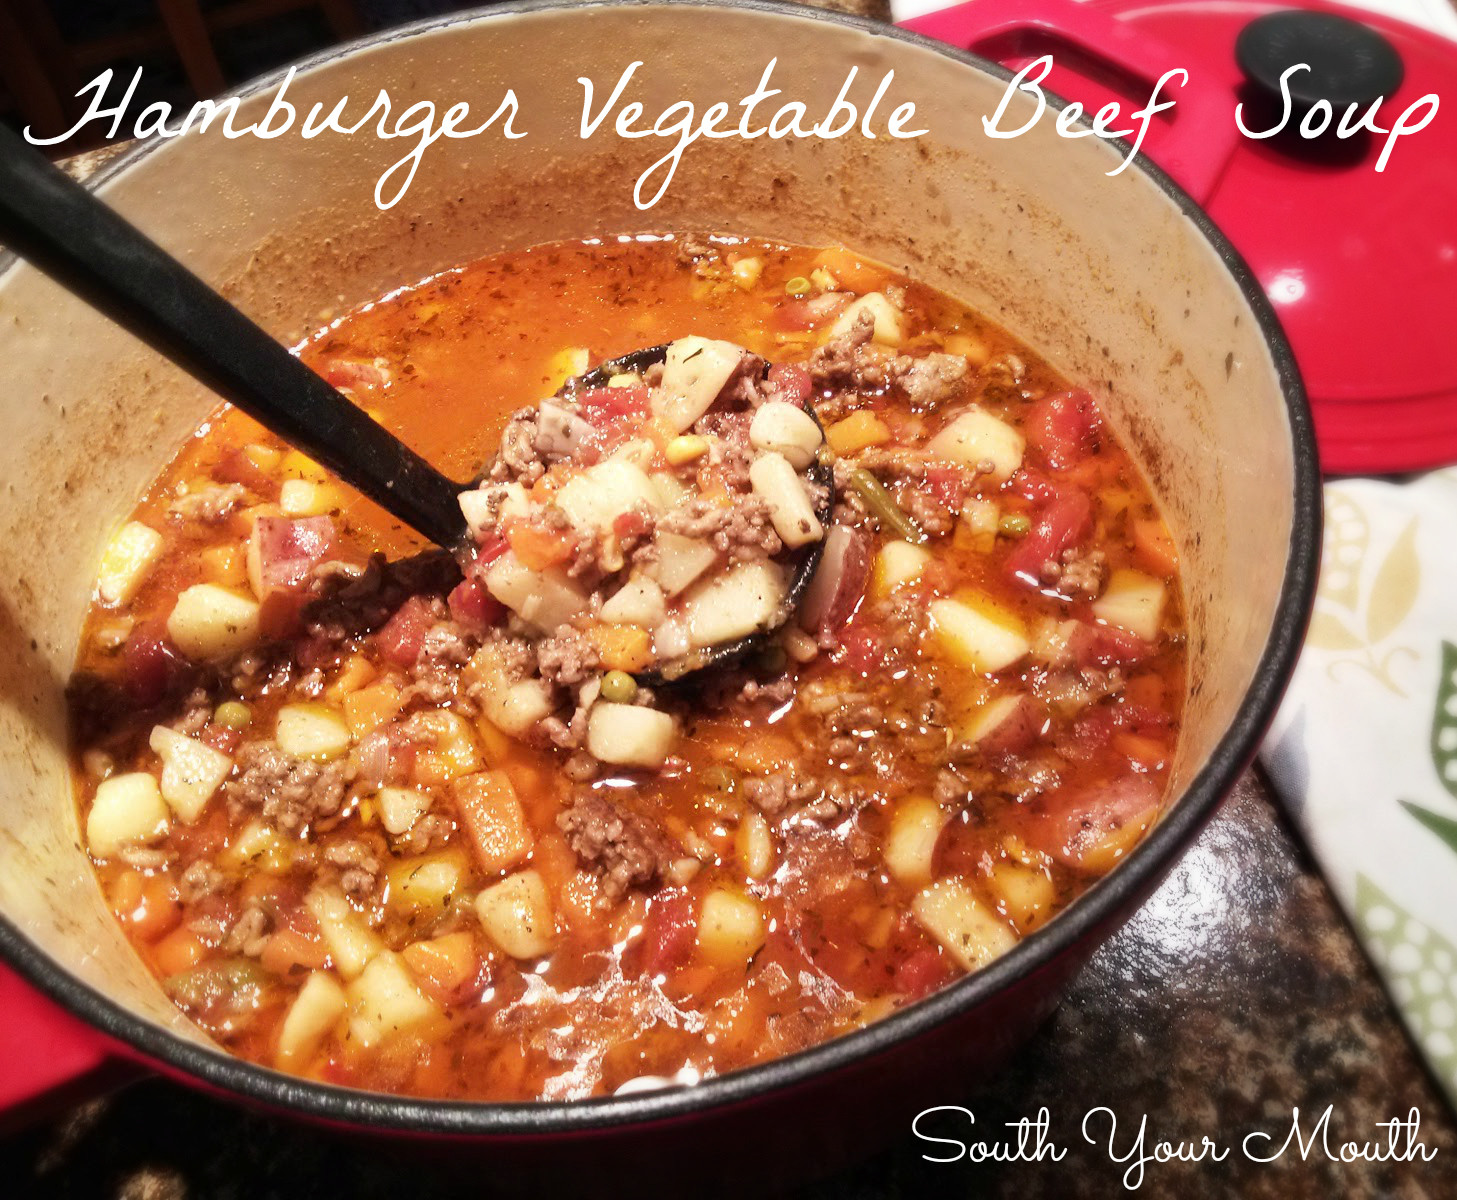 Soup Recipes With Ground Beef
 South Your Mouth Hamburger Ve able Beef Soup